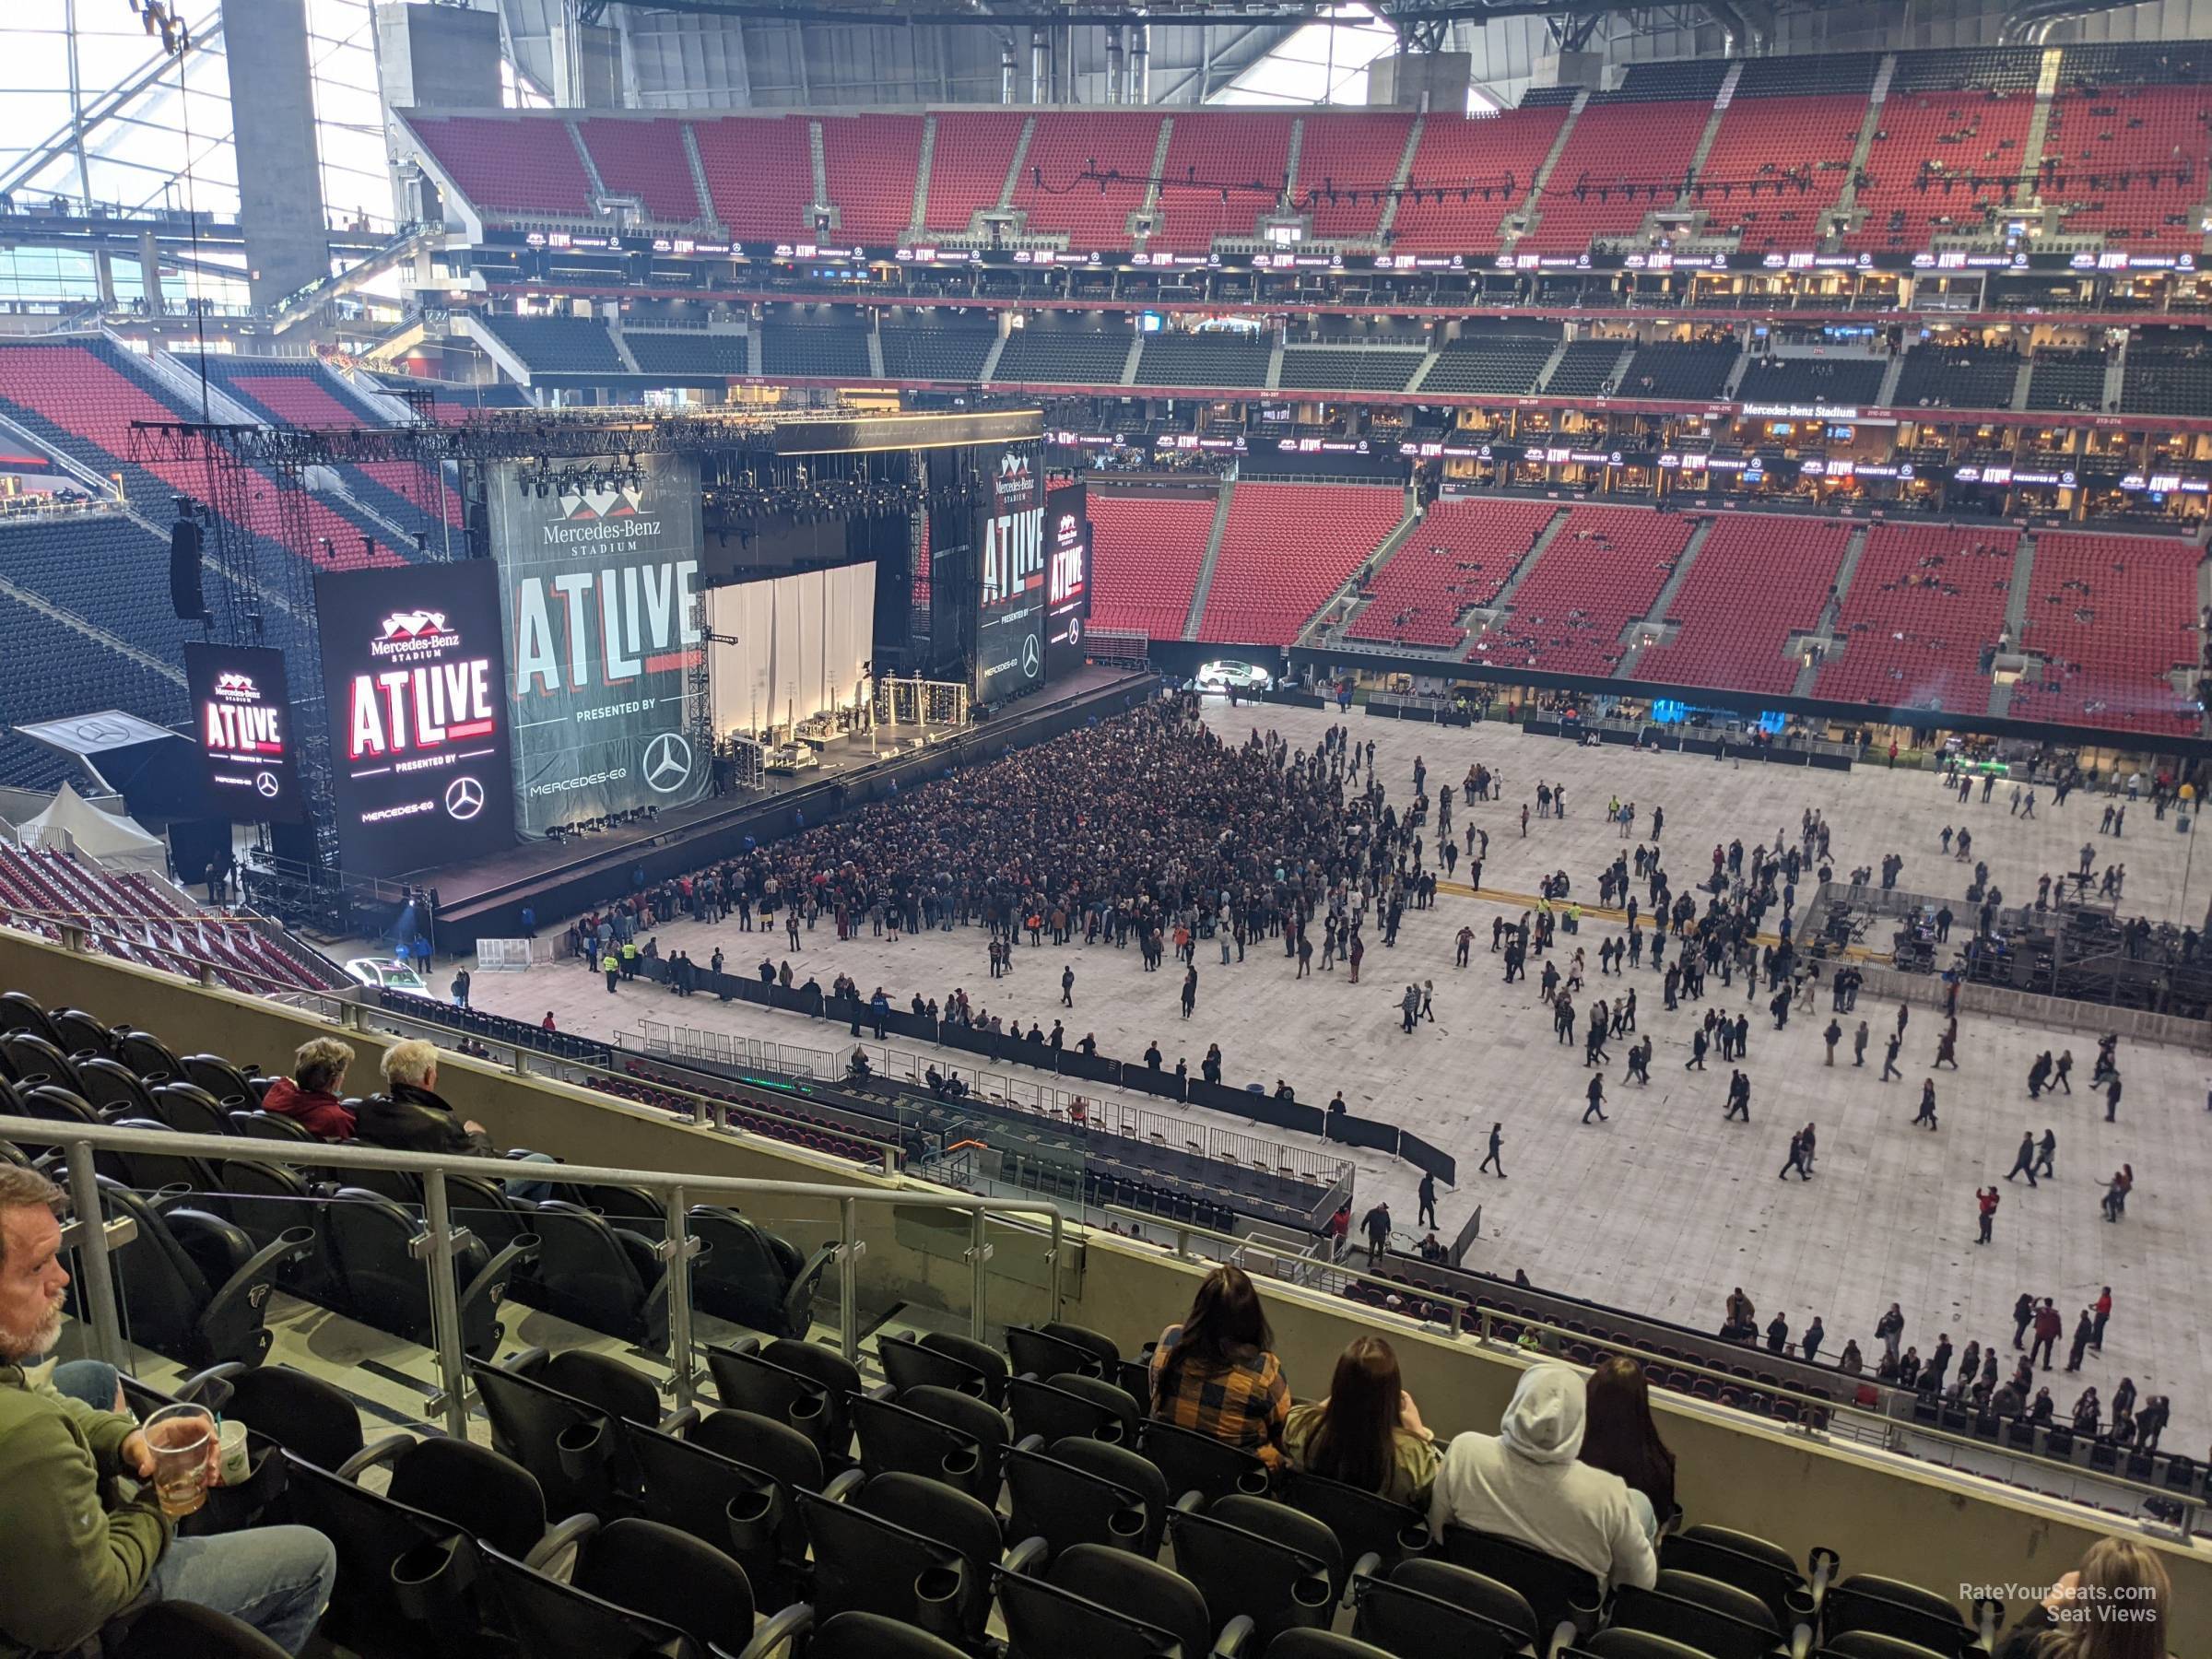 section 235, row 5 seat view  for concert - mercedes-benz stadium